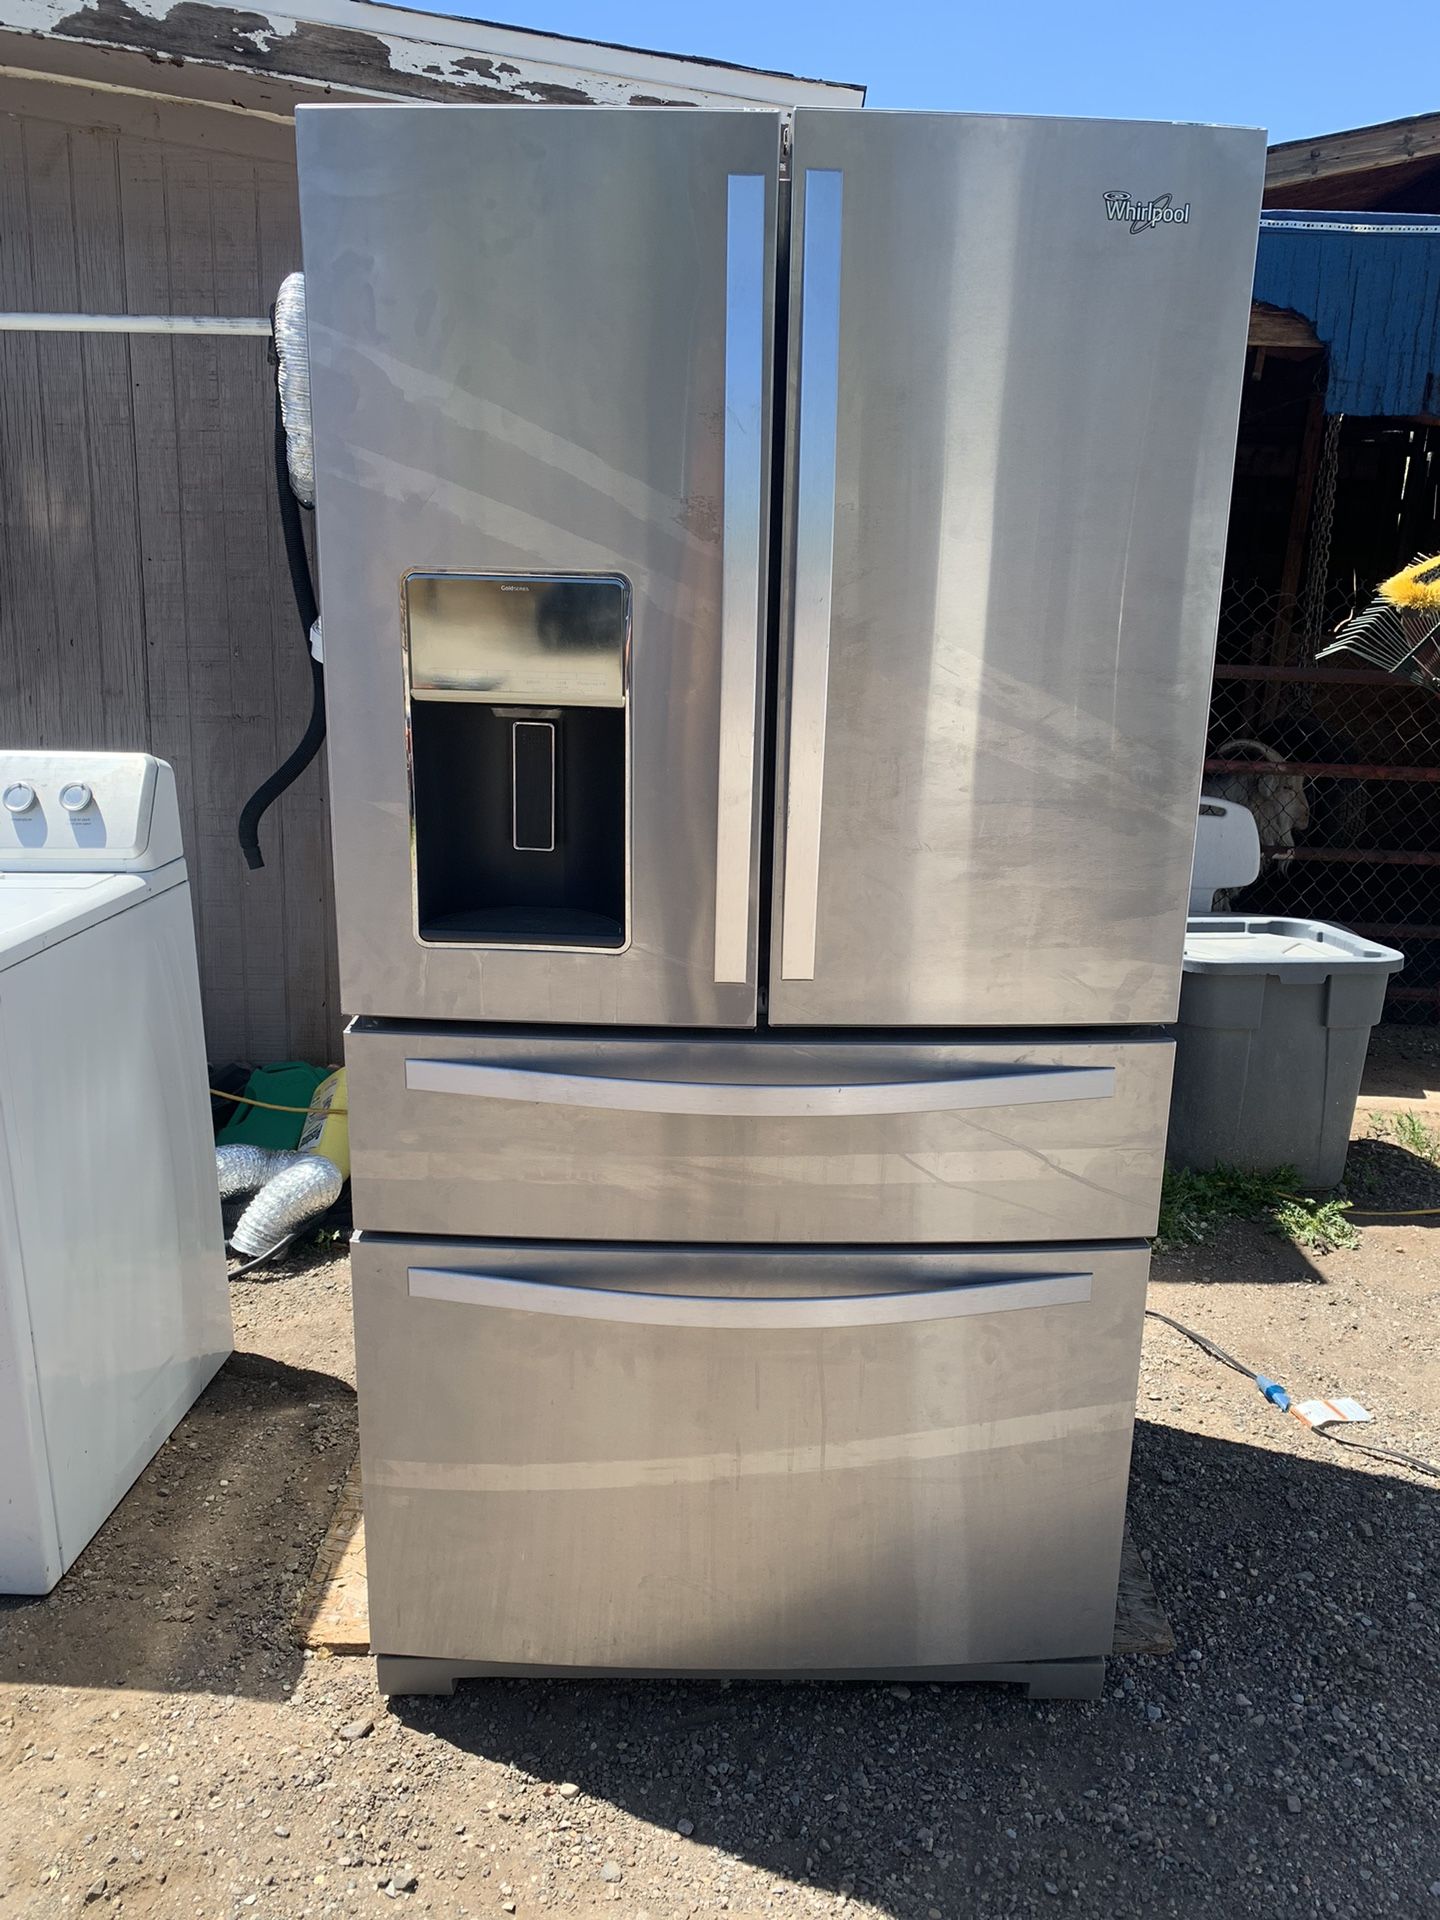 Whirlpool Gold Series Stainless Steel French Door Refrigerator For Sale $550 Or Best Offer